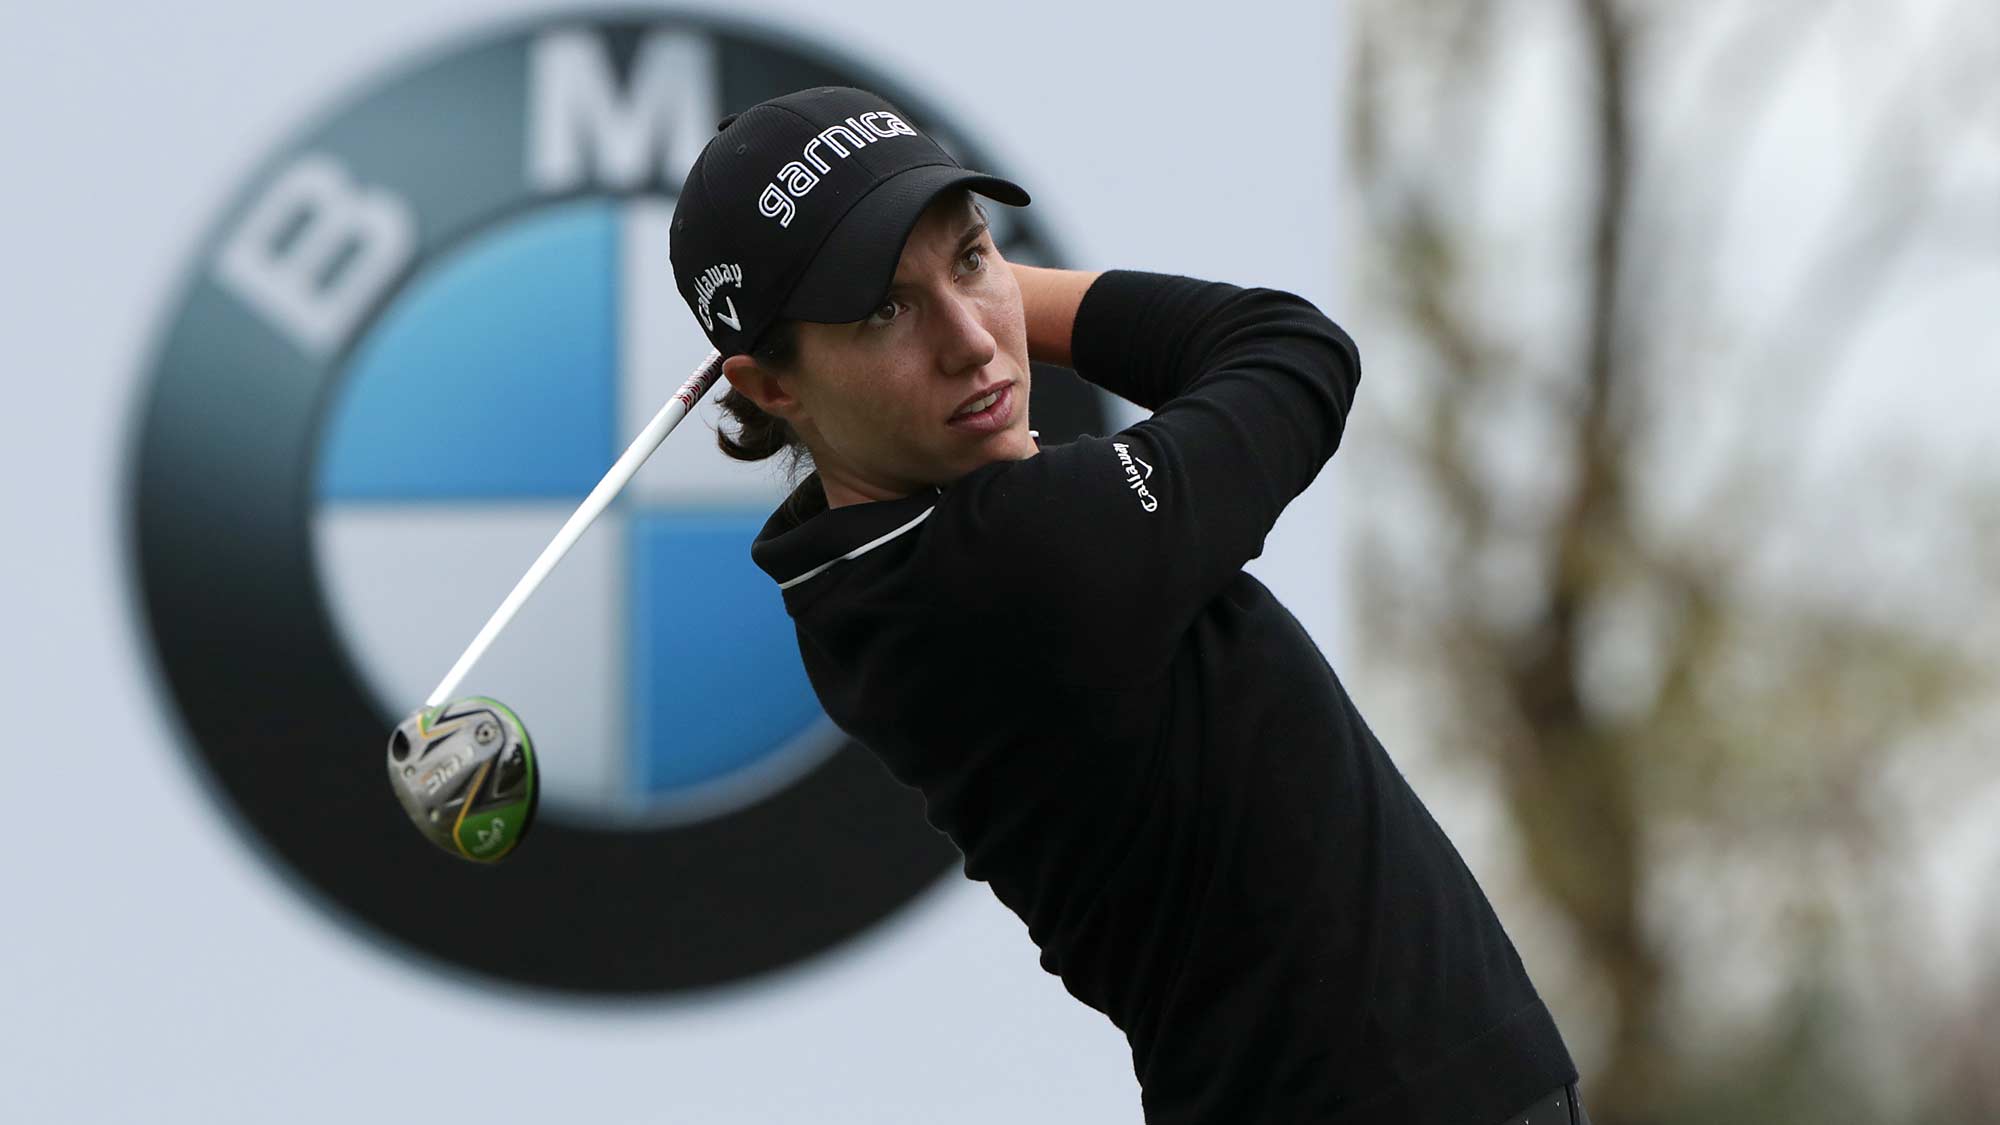 Carlota Ciganda tees off at the 2nd round of the BMW